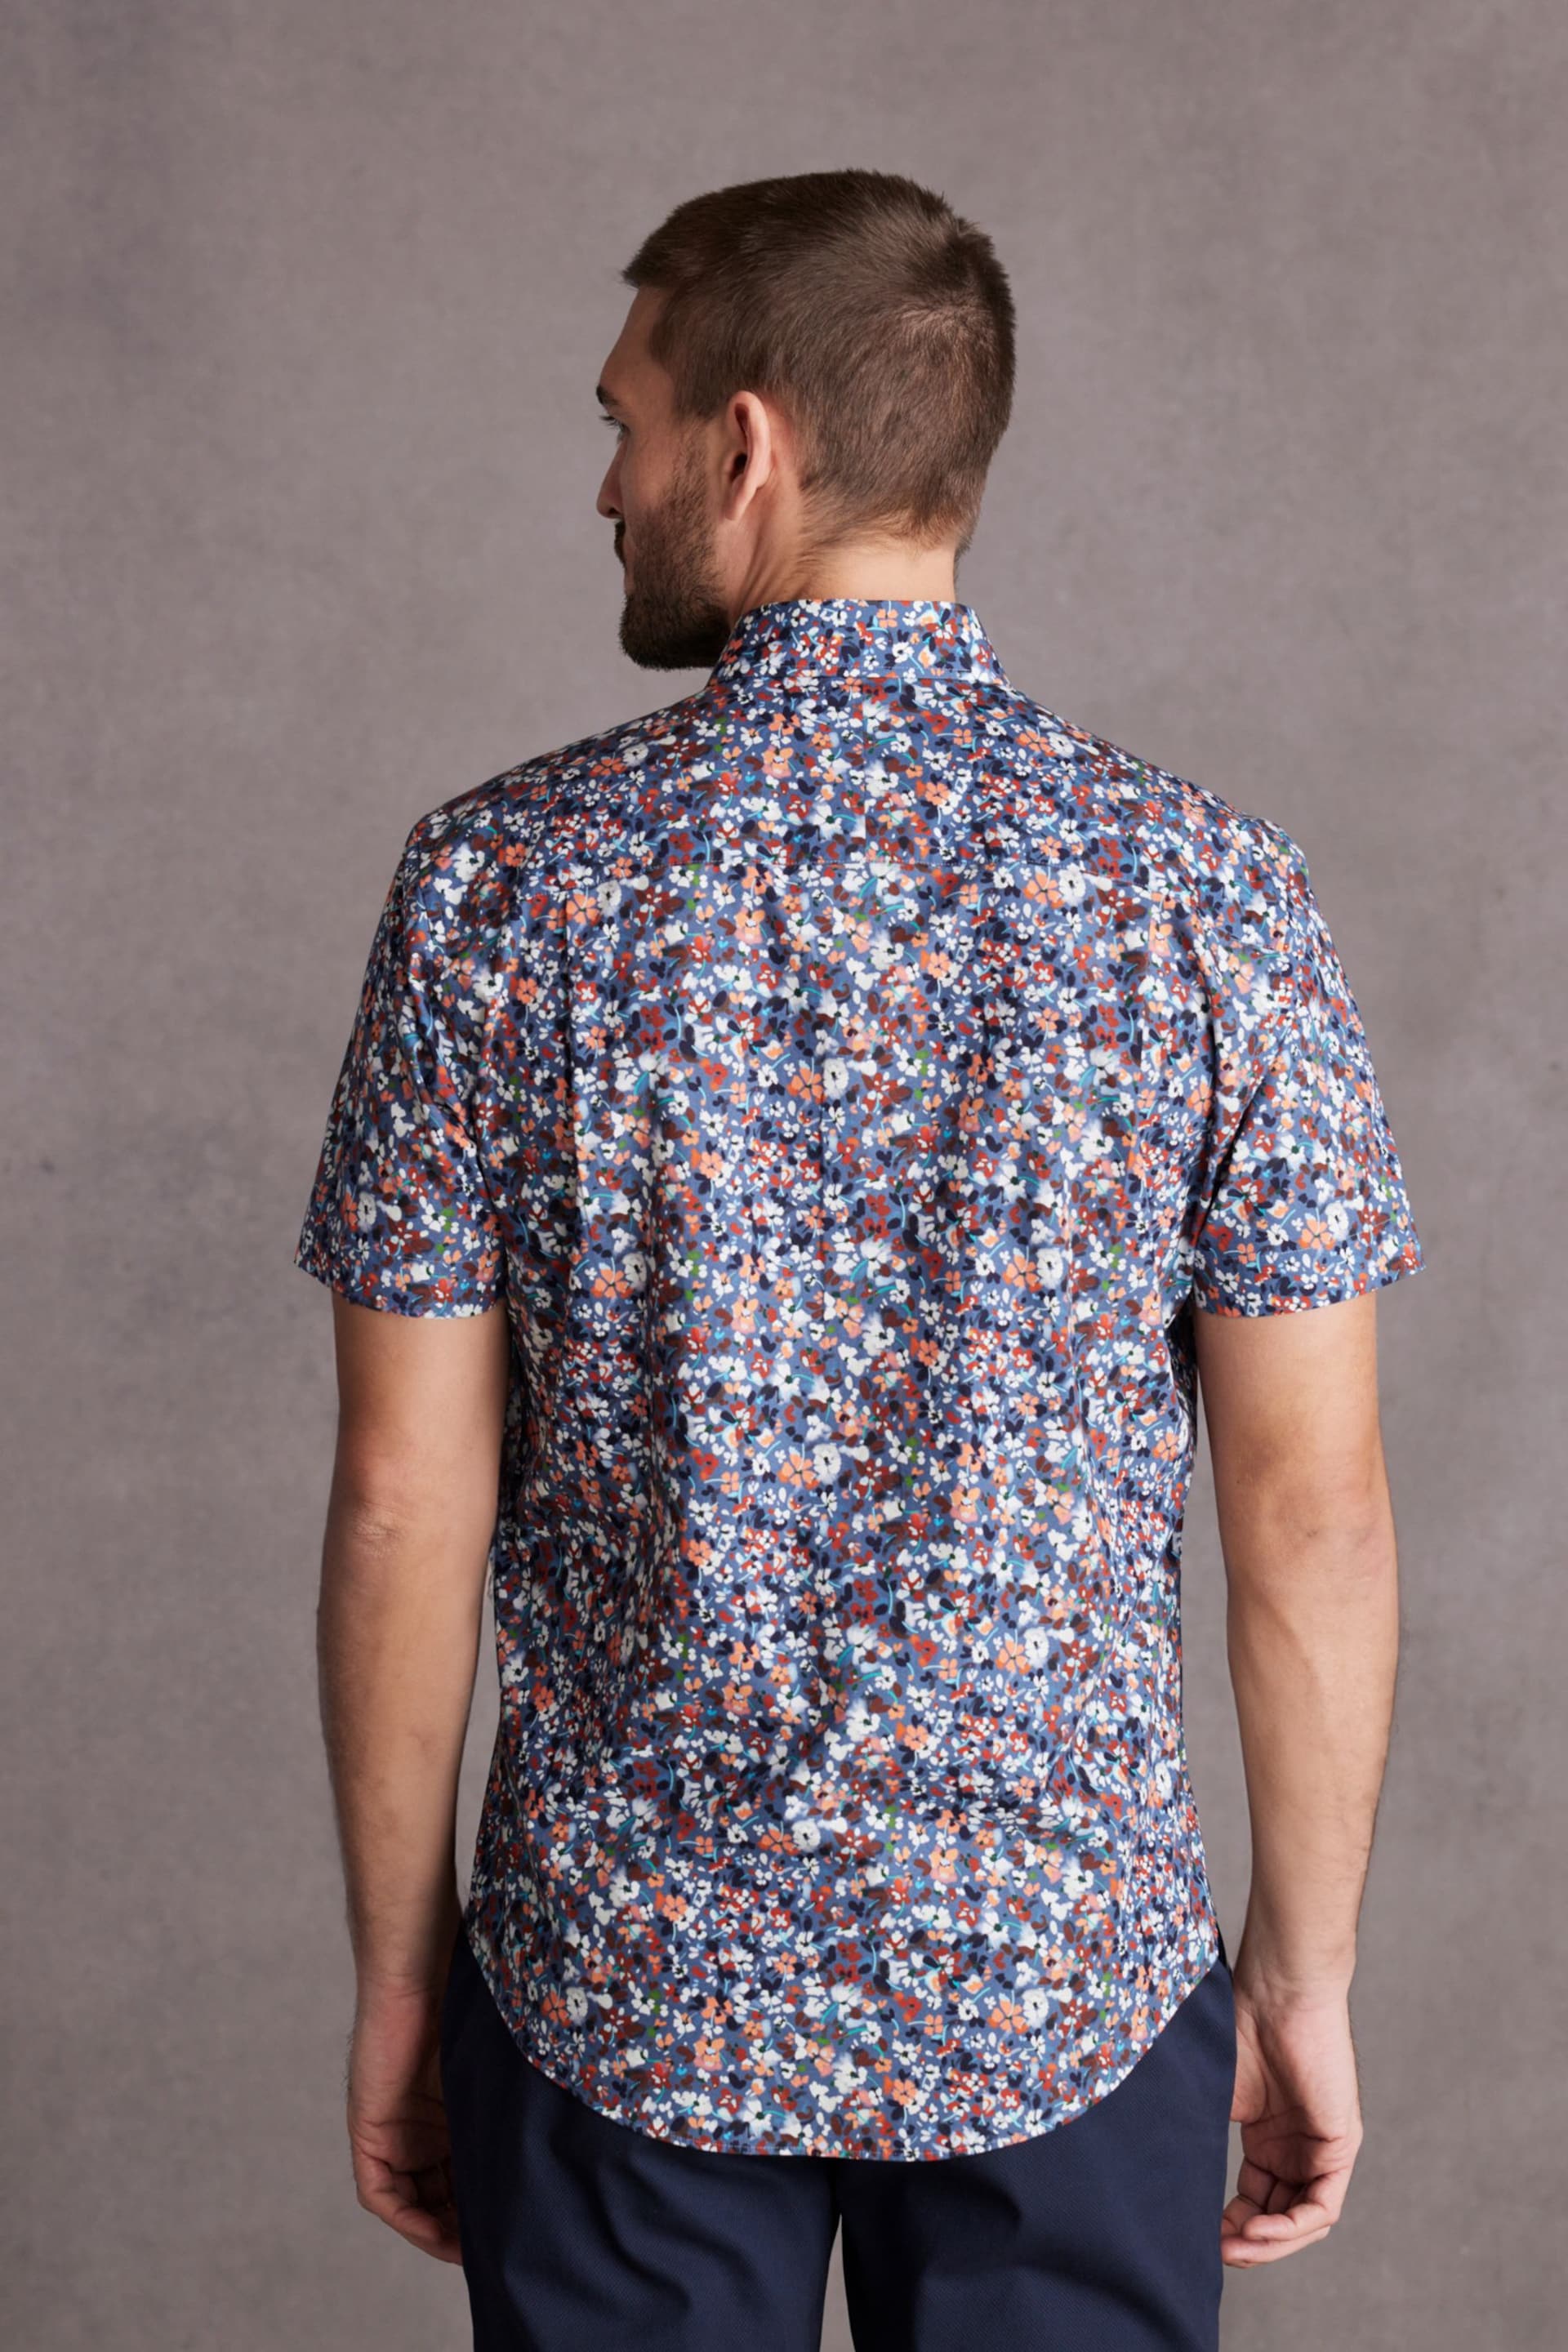 Blue Floral Signature Made With Italian Fabric Printed Short Sleeve Shirt - Image 3 of 7